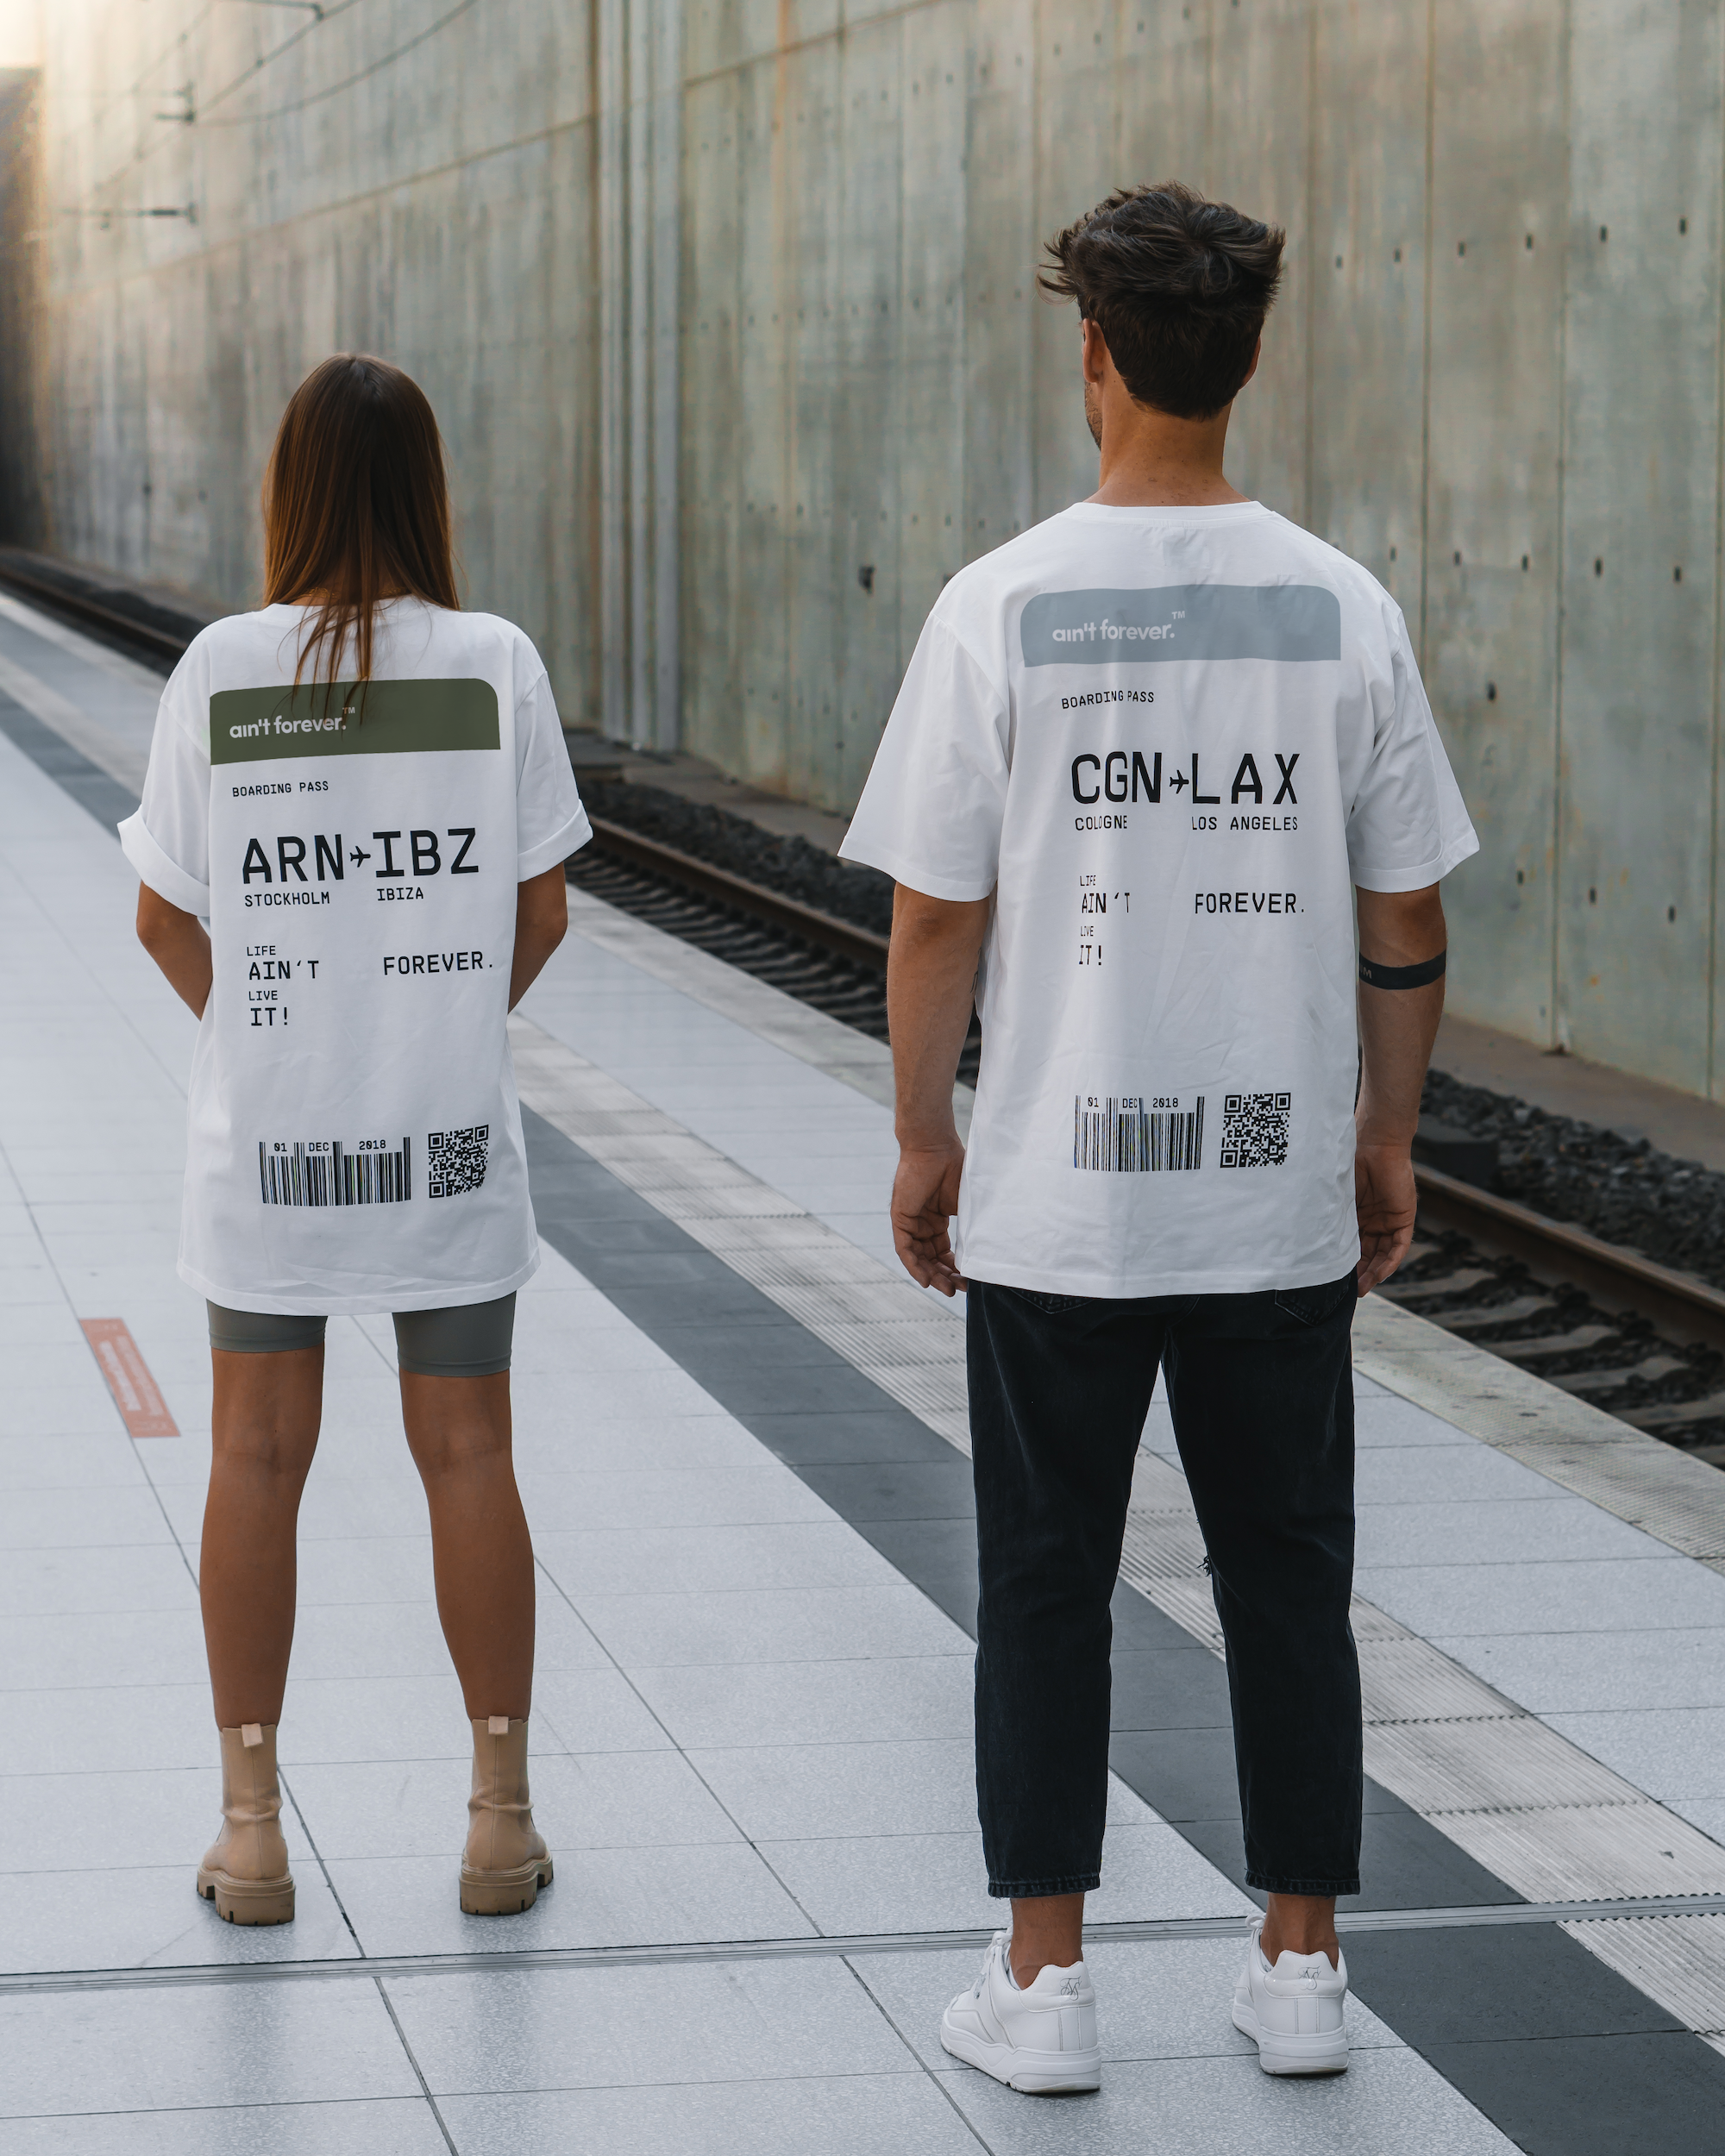 THE BOARDING PASS T-SHIRT (WHITE / OLIVE)